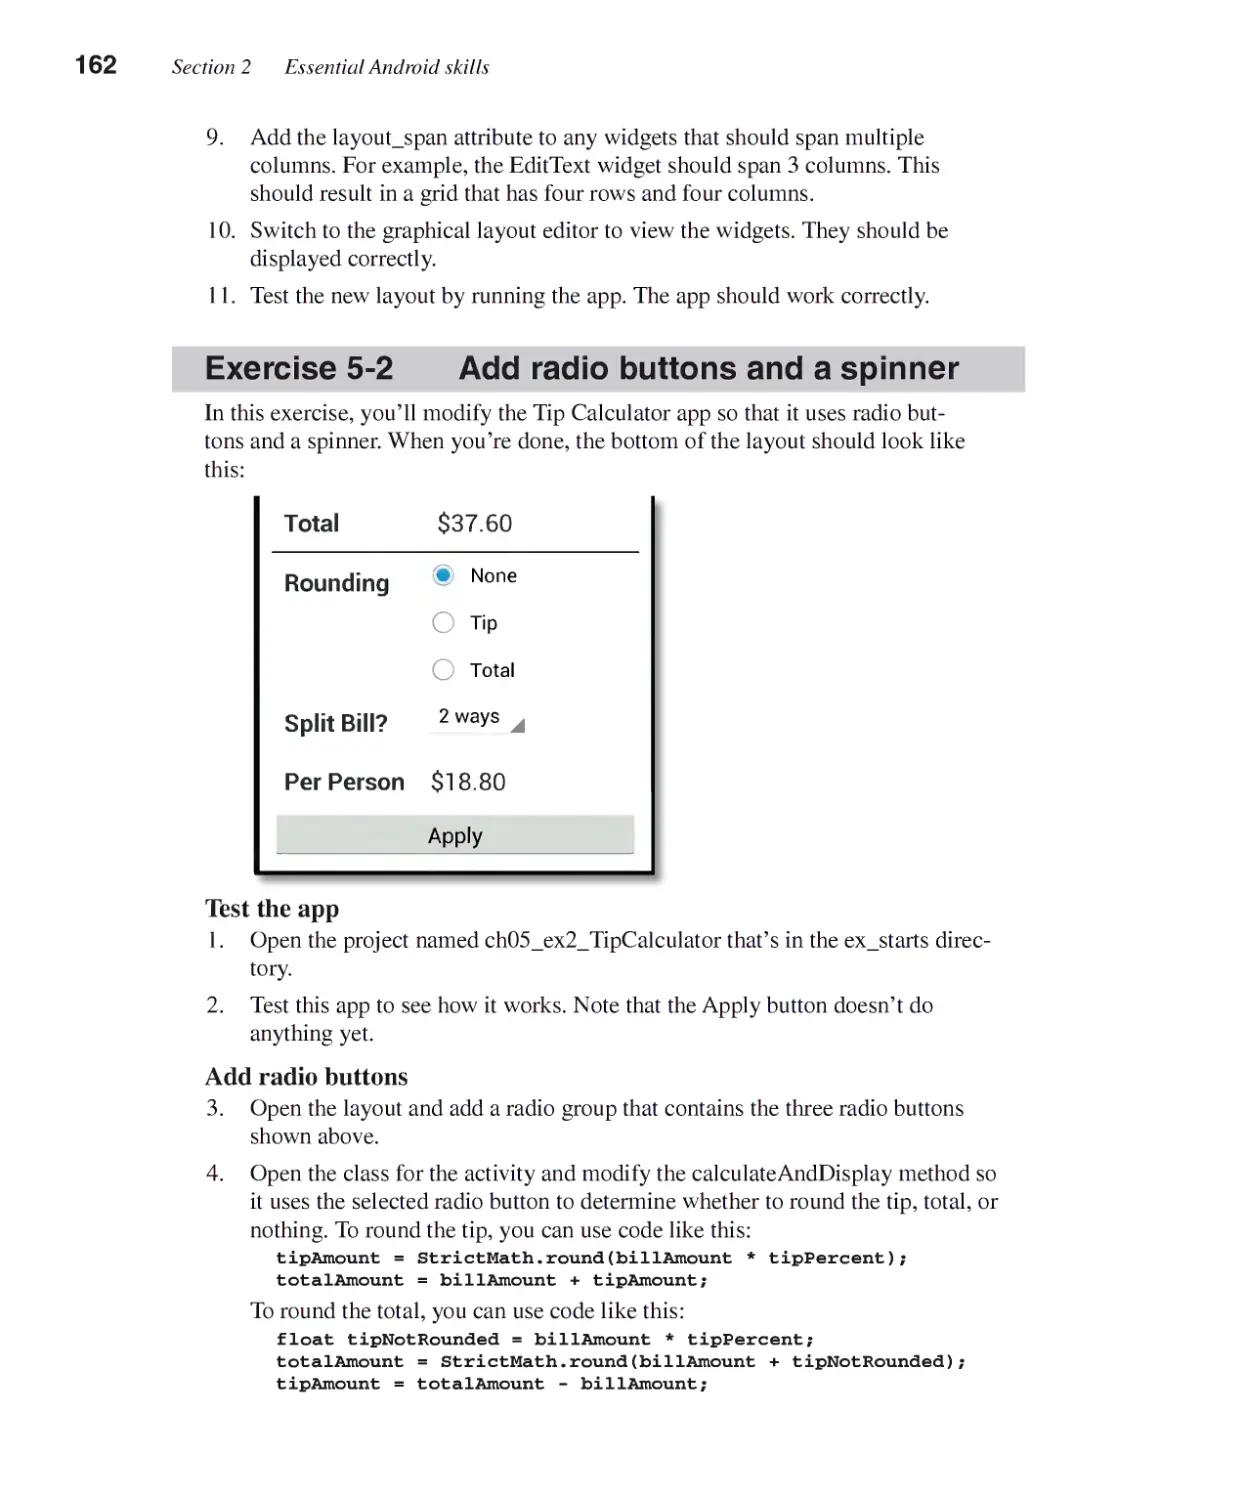 Exercise 5-2 - Add Radio Buttons and a Spinner